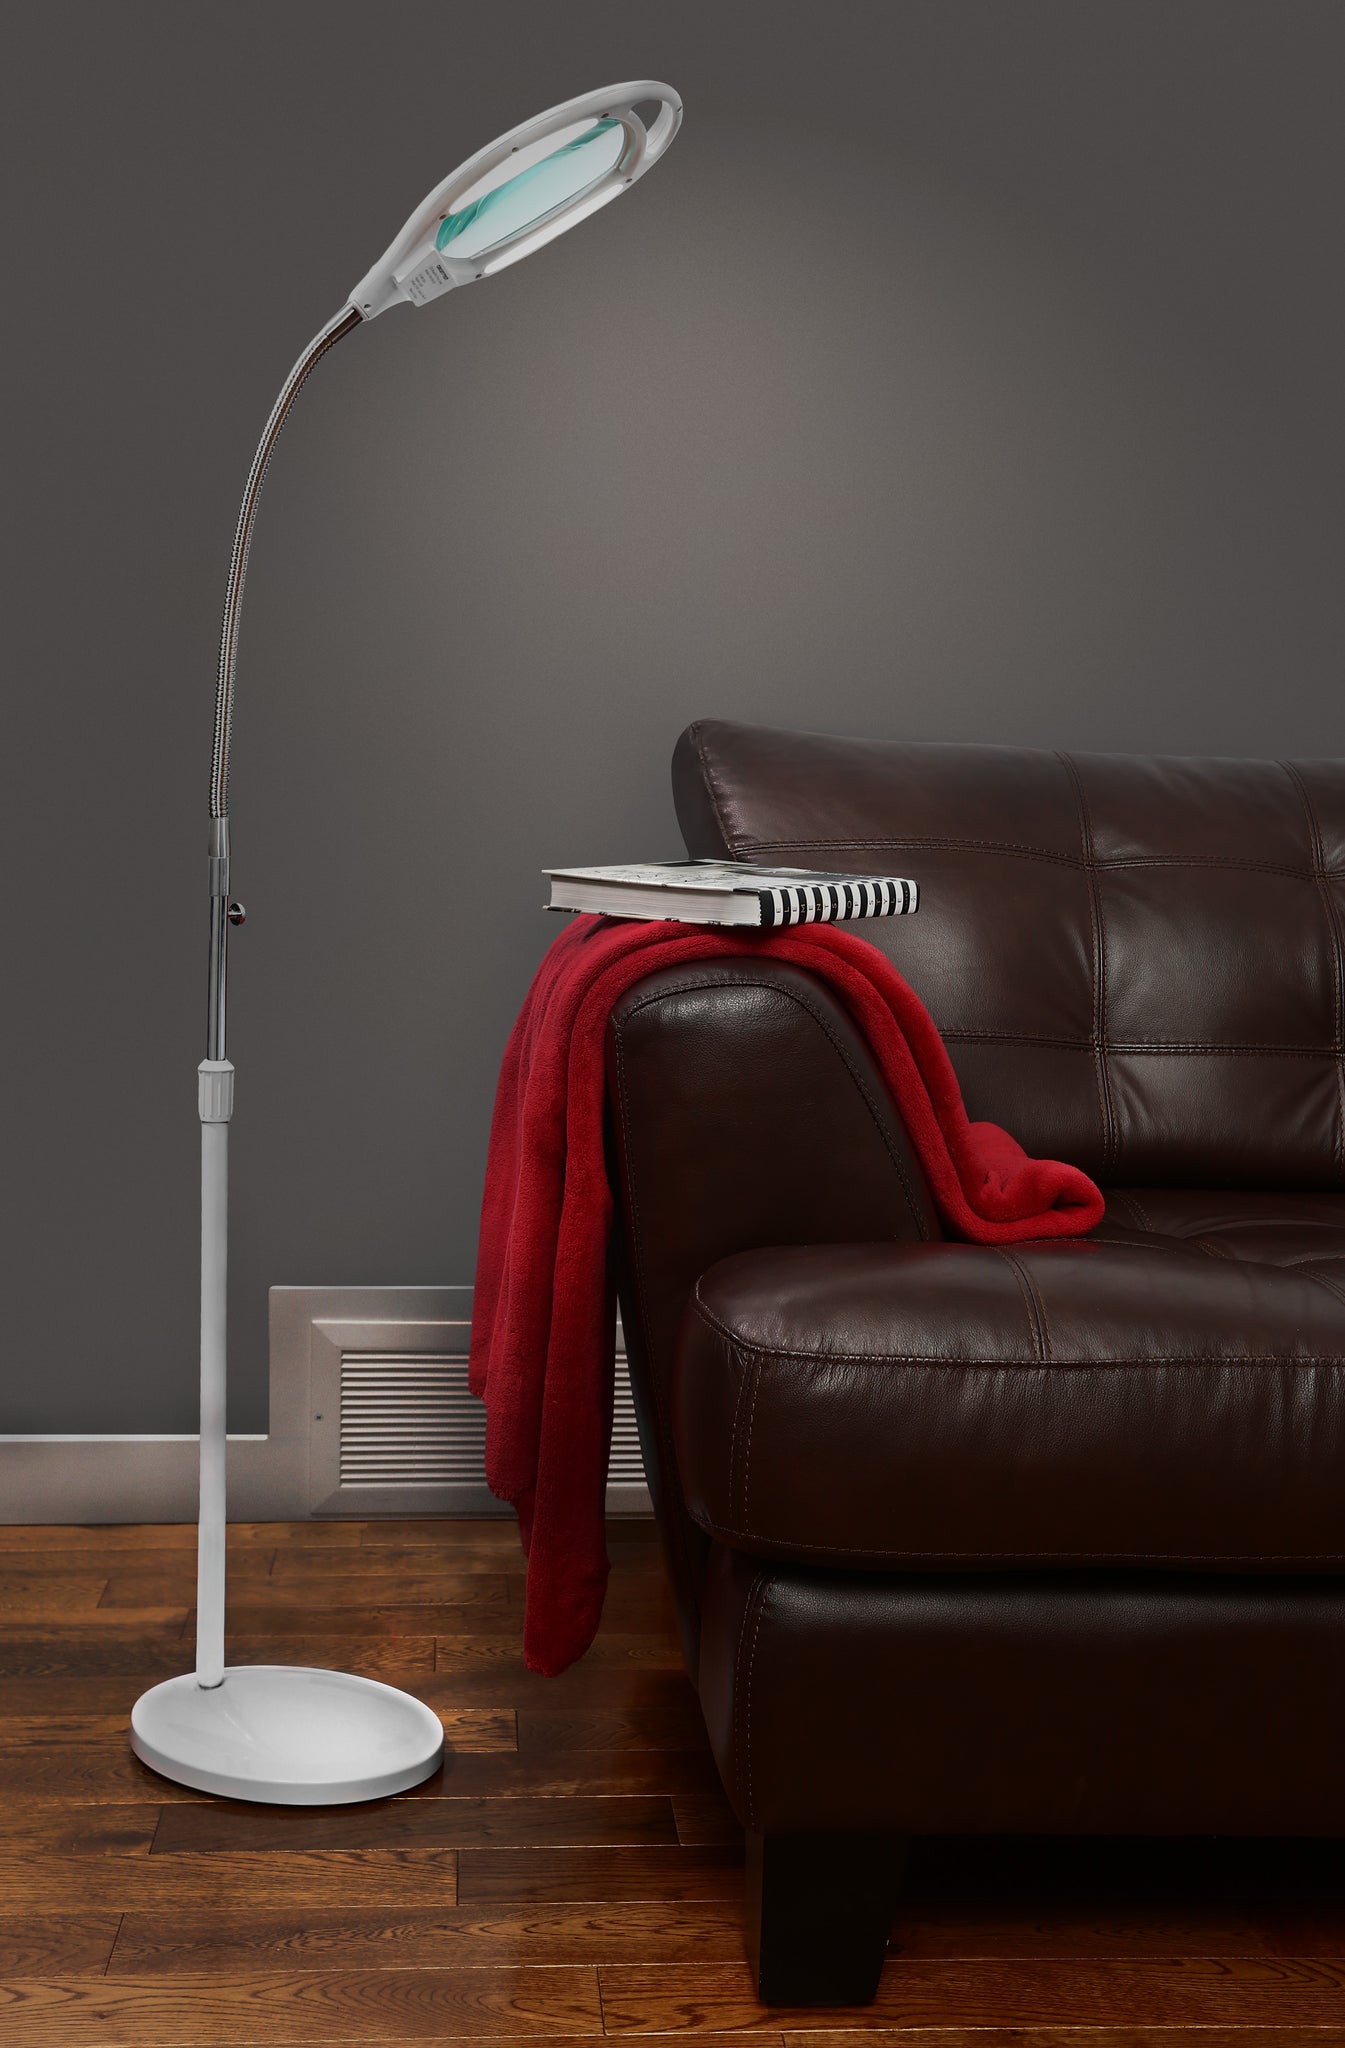 LED Magnifying Floor Lamp with Adjustable Gooseneck - 1.75x